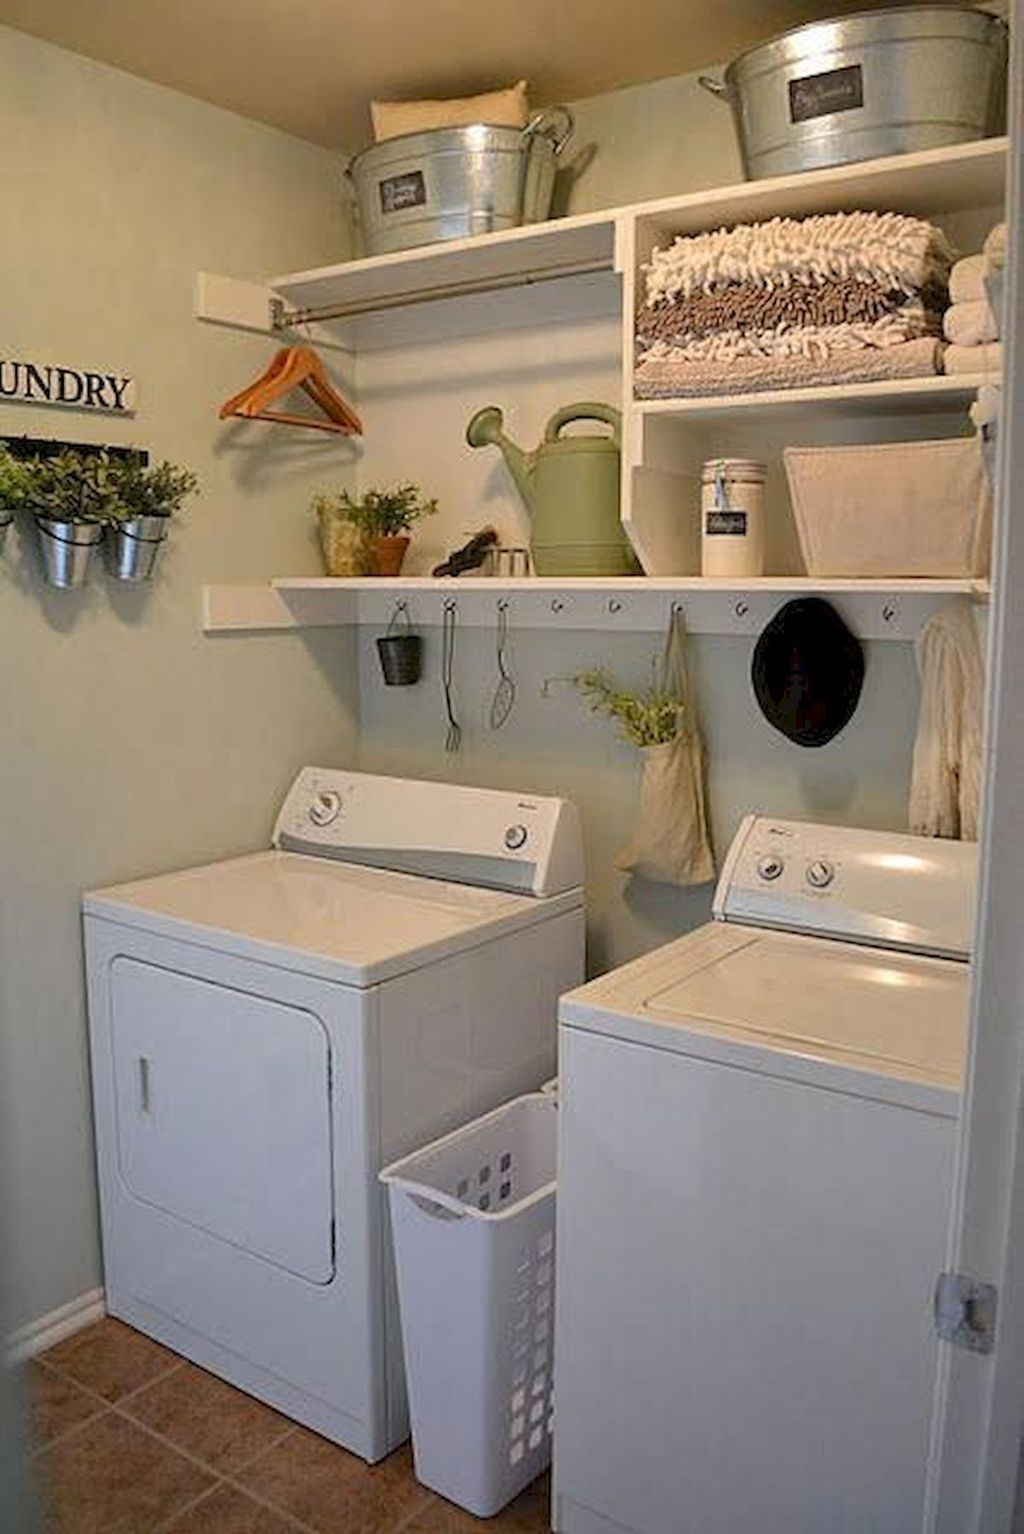 Favored Laundry Room Organization Ideas To Try 12